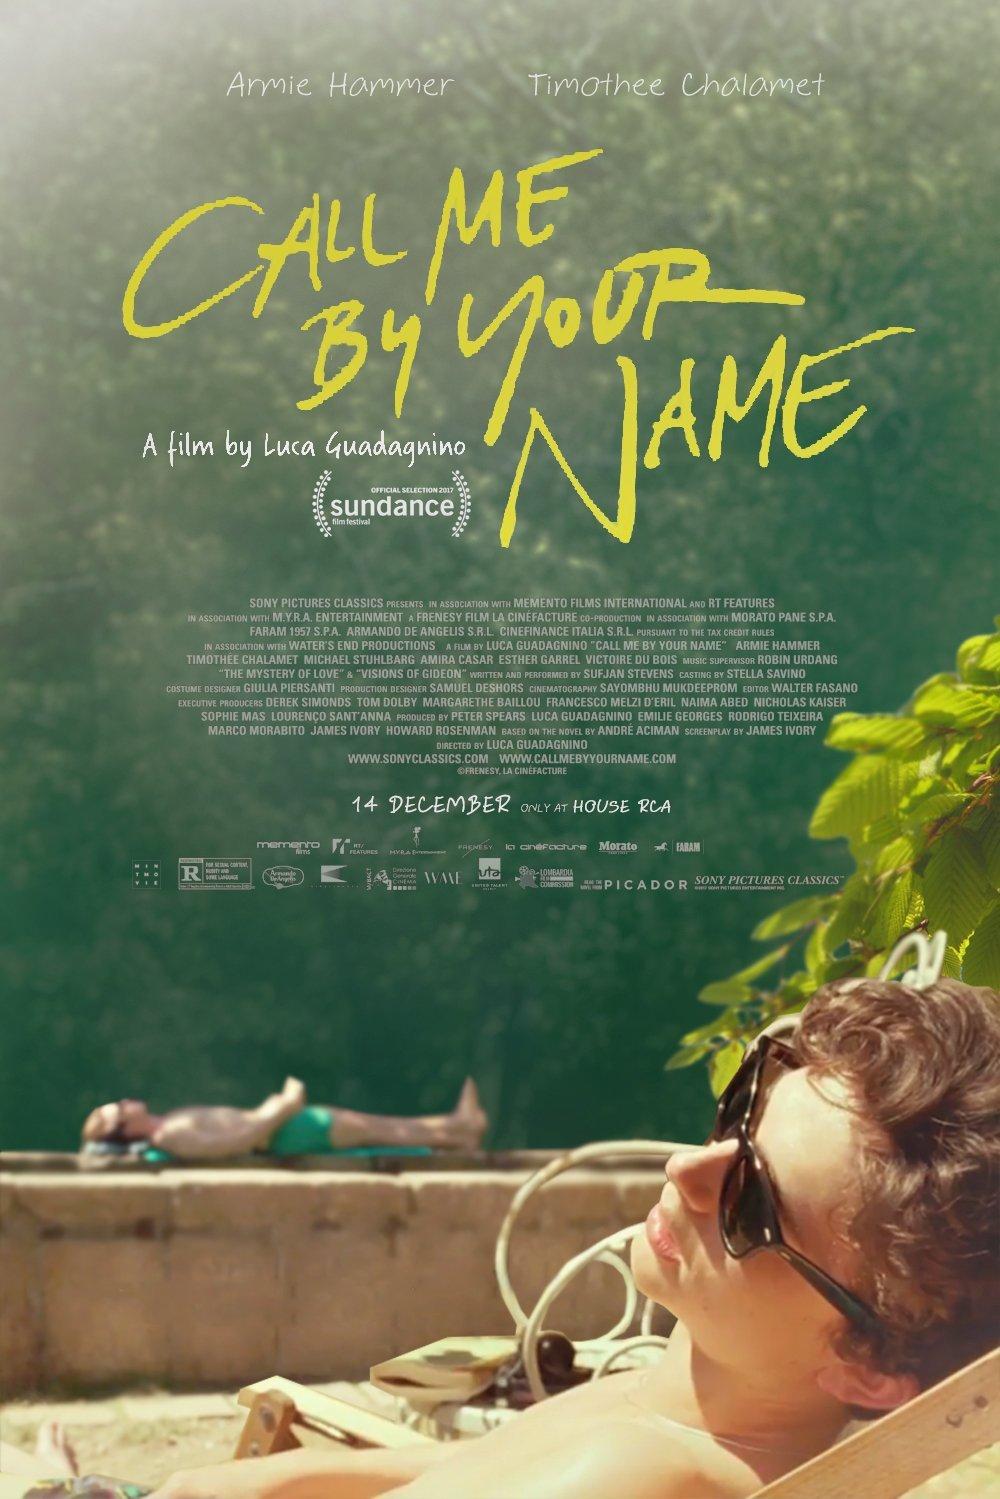 1.CALL ME BY YOUR NAME 